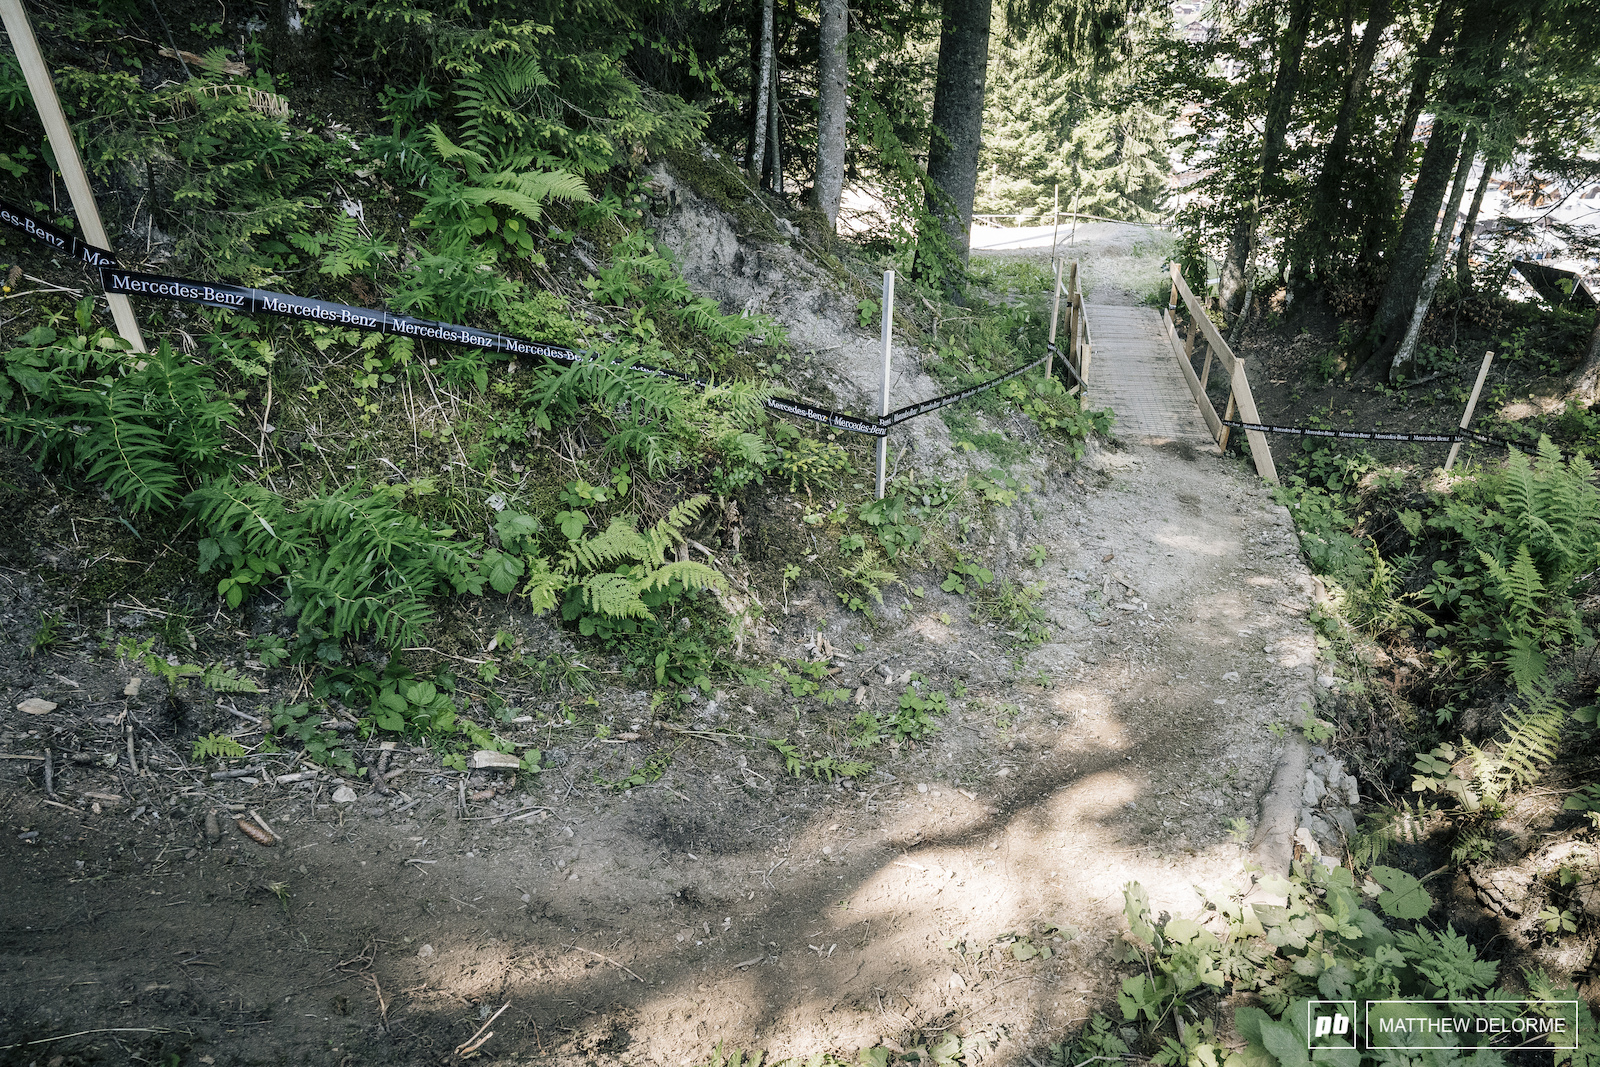 The exit from the loamy s turns to Dual Speed and Style.